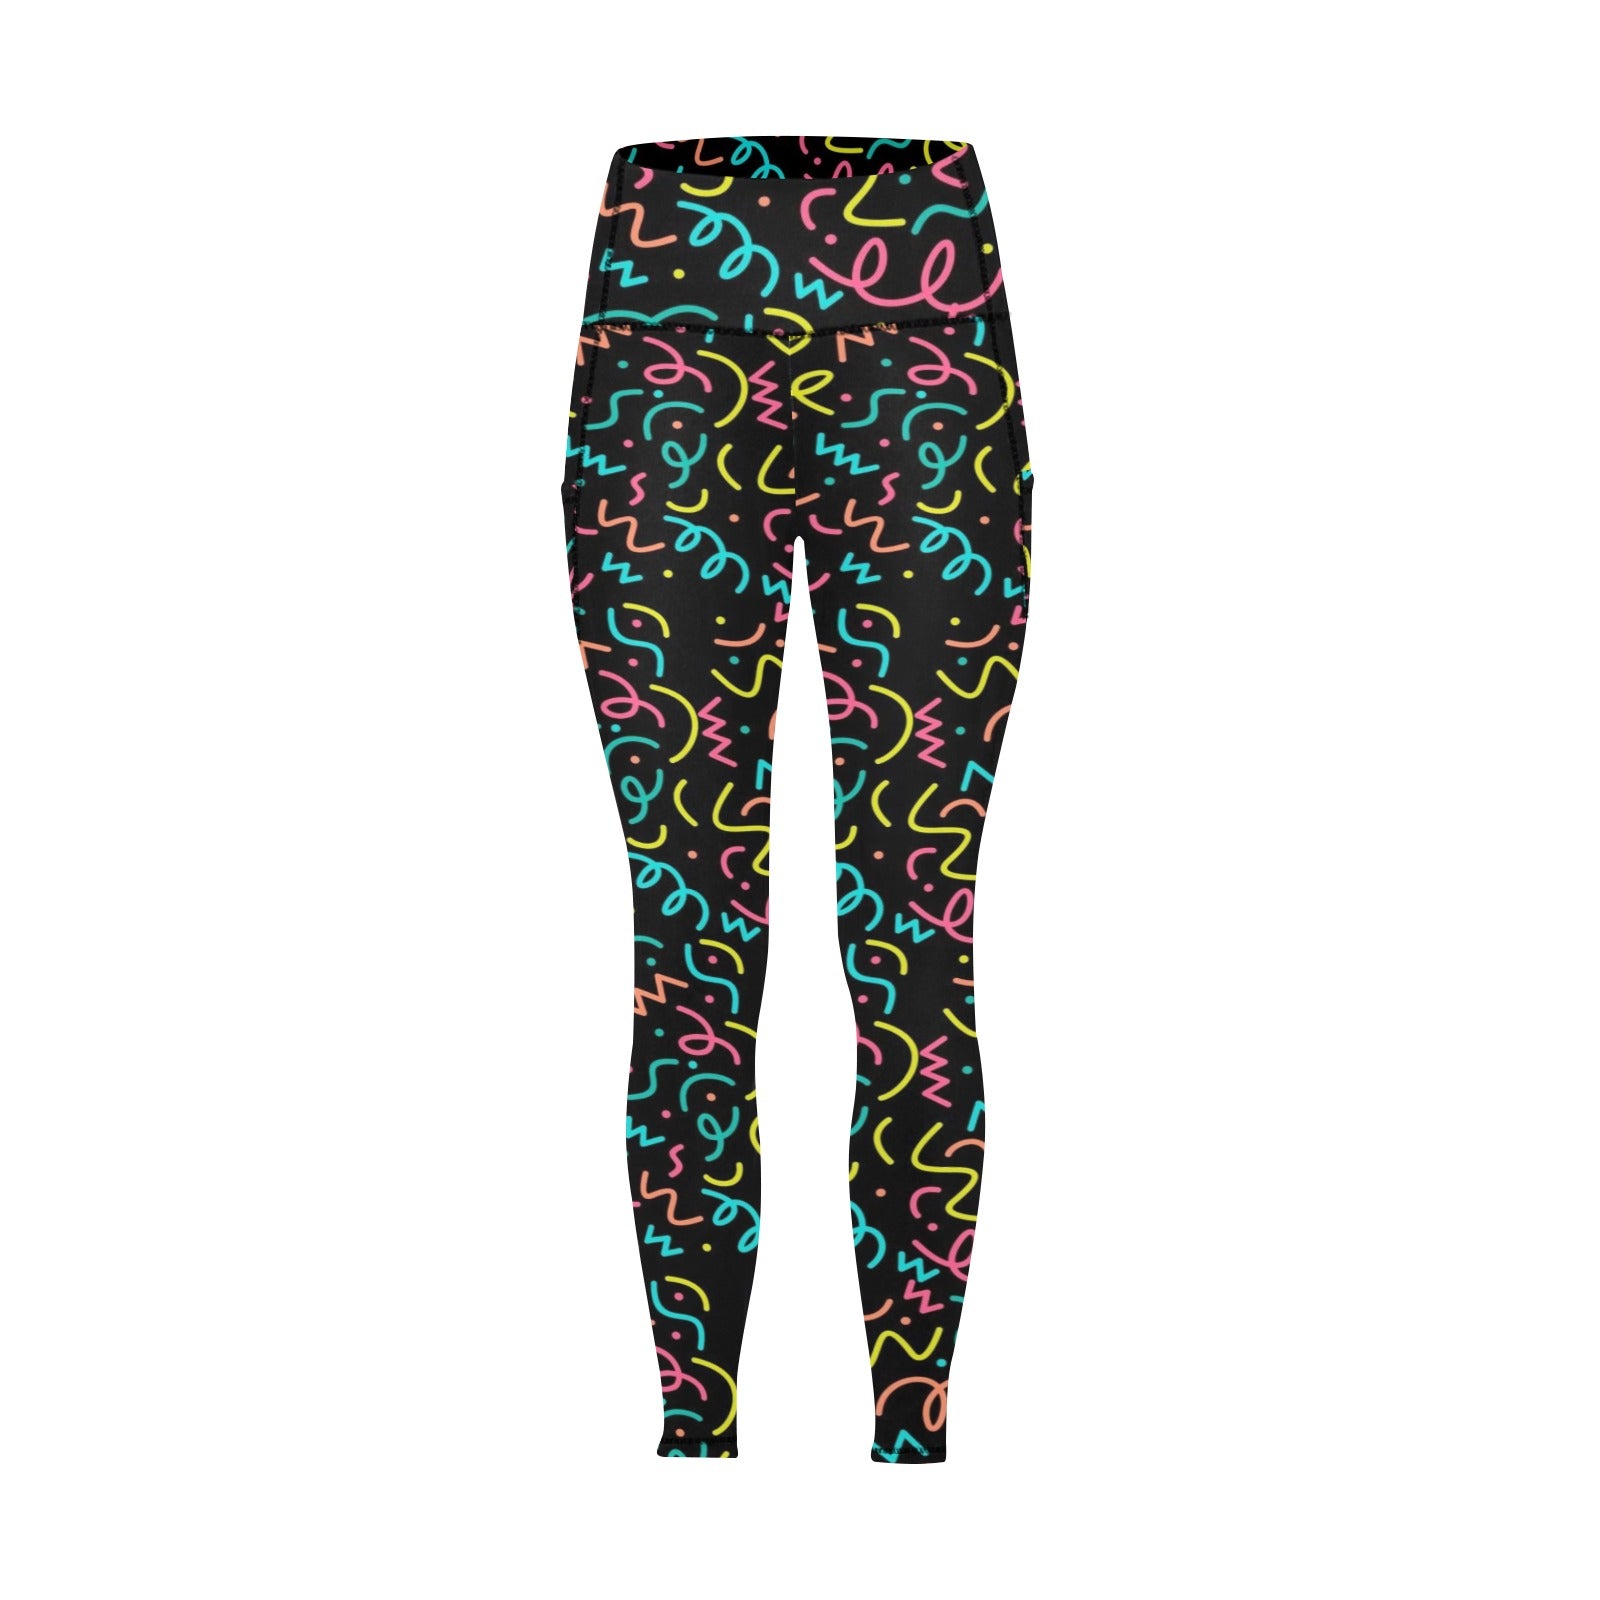 Squiggle Time - Women's with Pockets Women's Leggings with Pockets S - 2XL